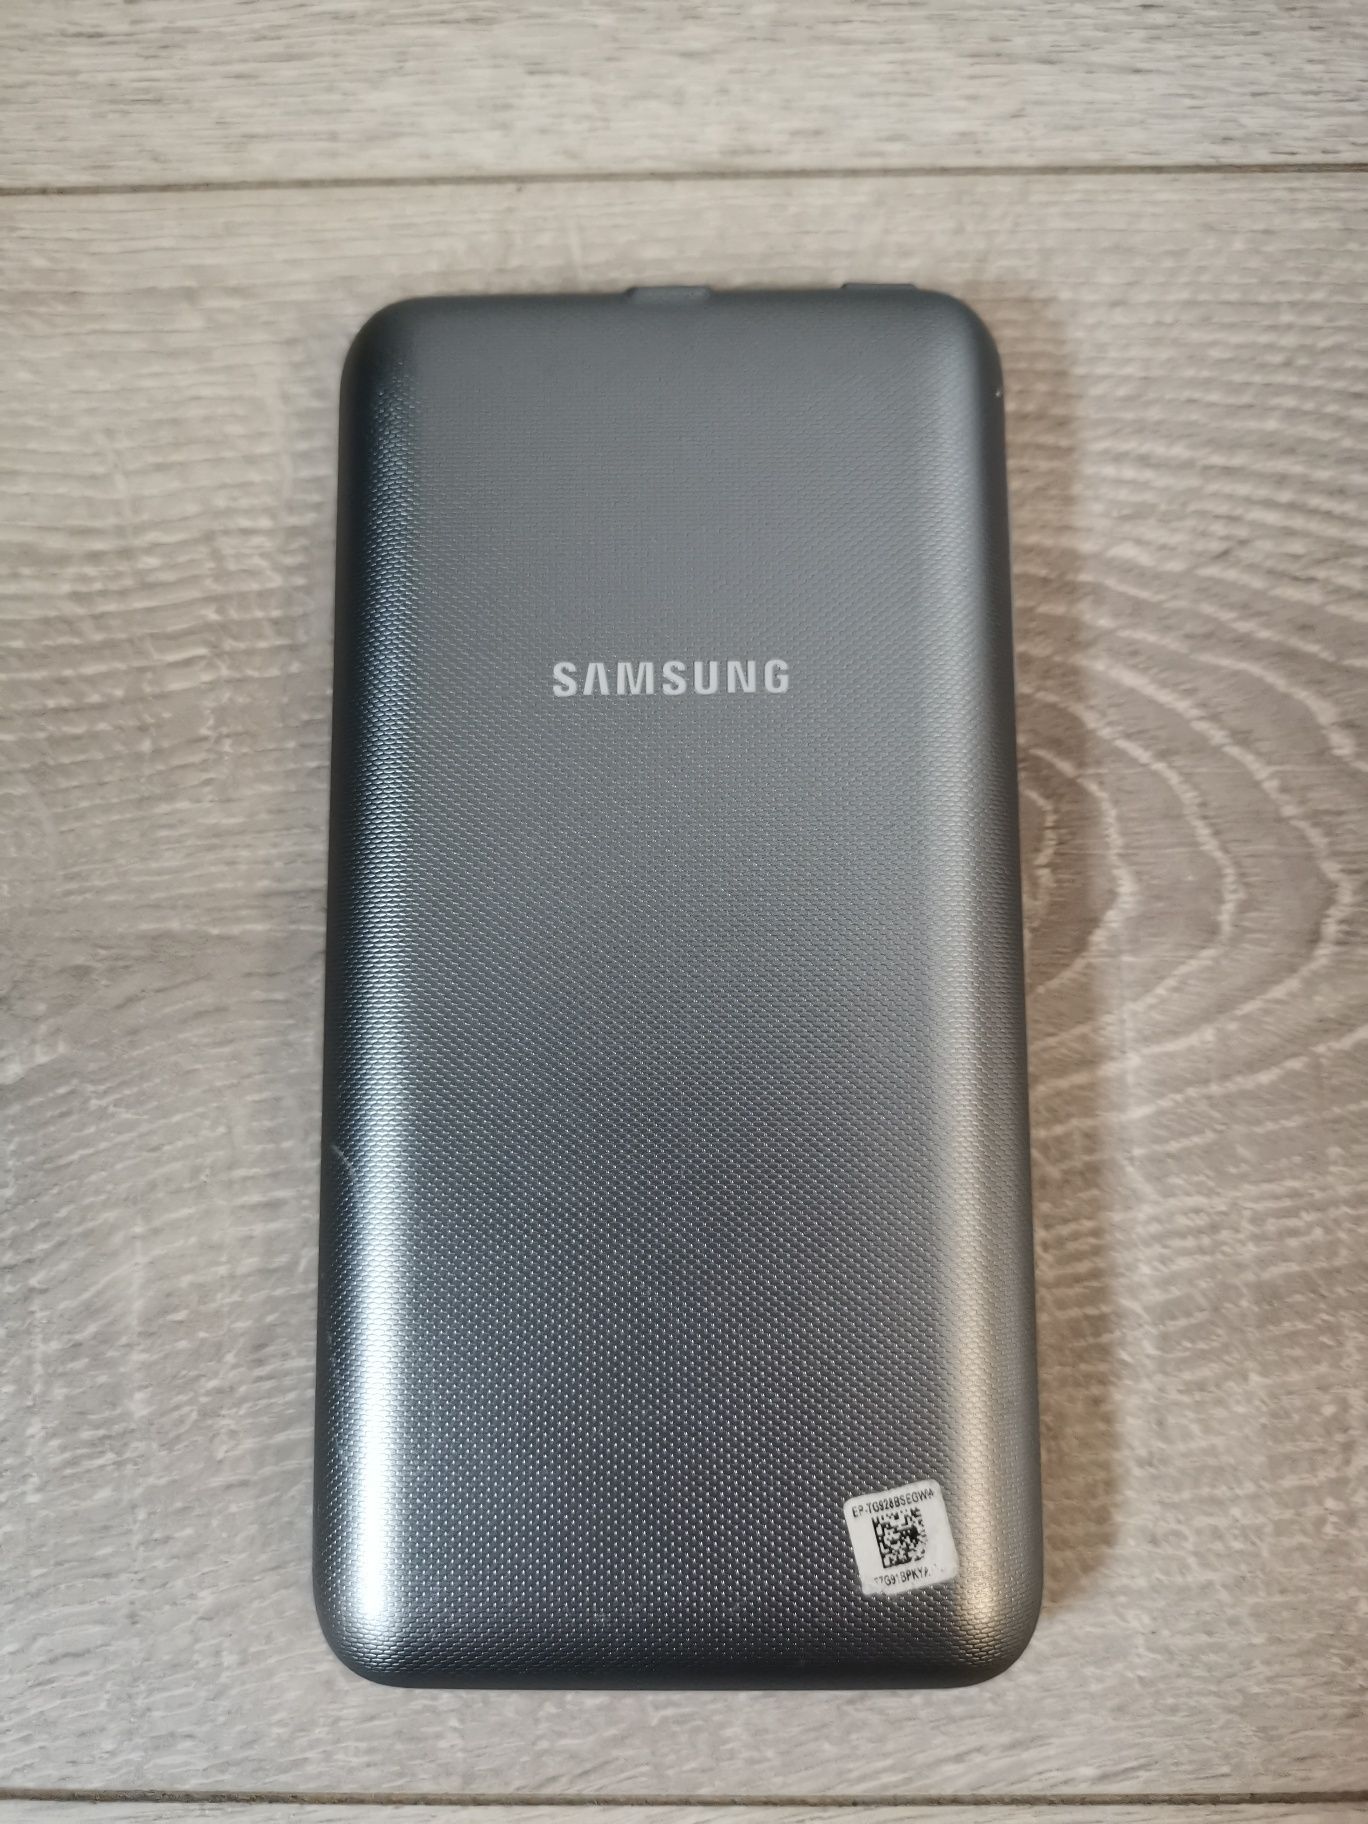 Samsung Galaxy S6 edge+ (plus) Wireless Charger Pack